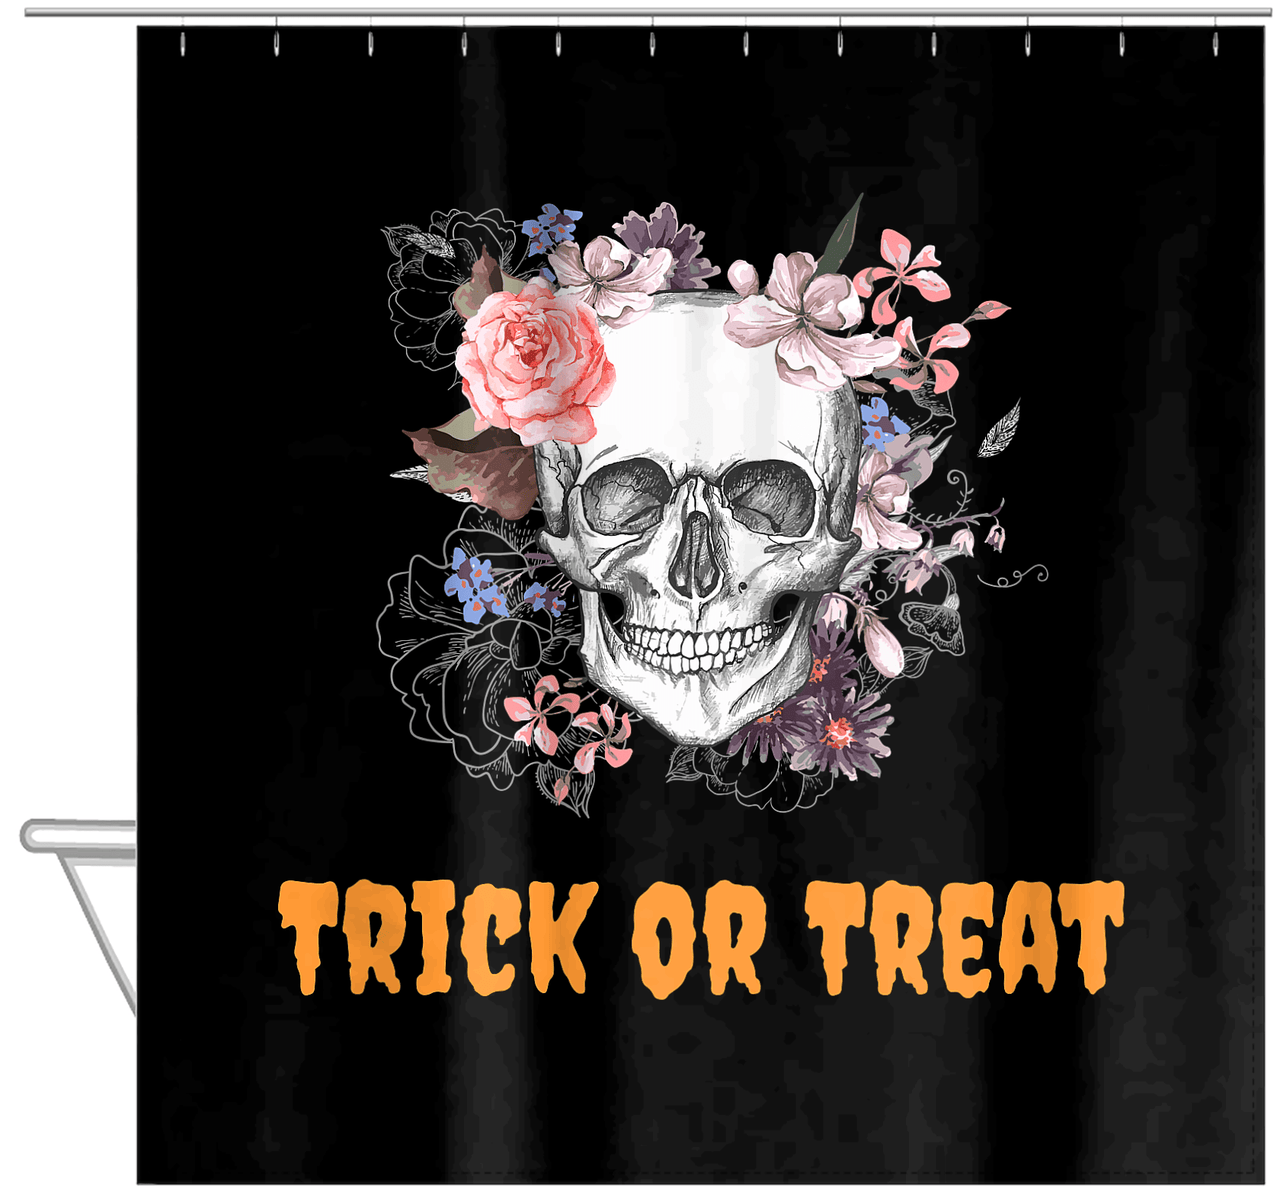 Personalized Skull and Flowers Shower Curtain - Black Background - Text Below Skull - Hanging View